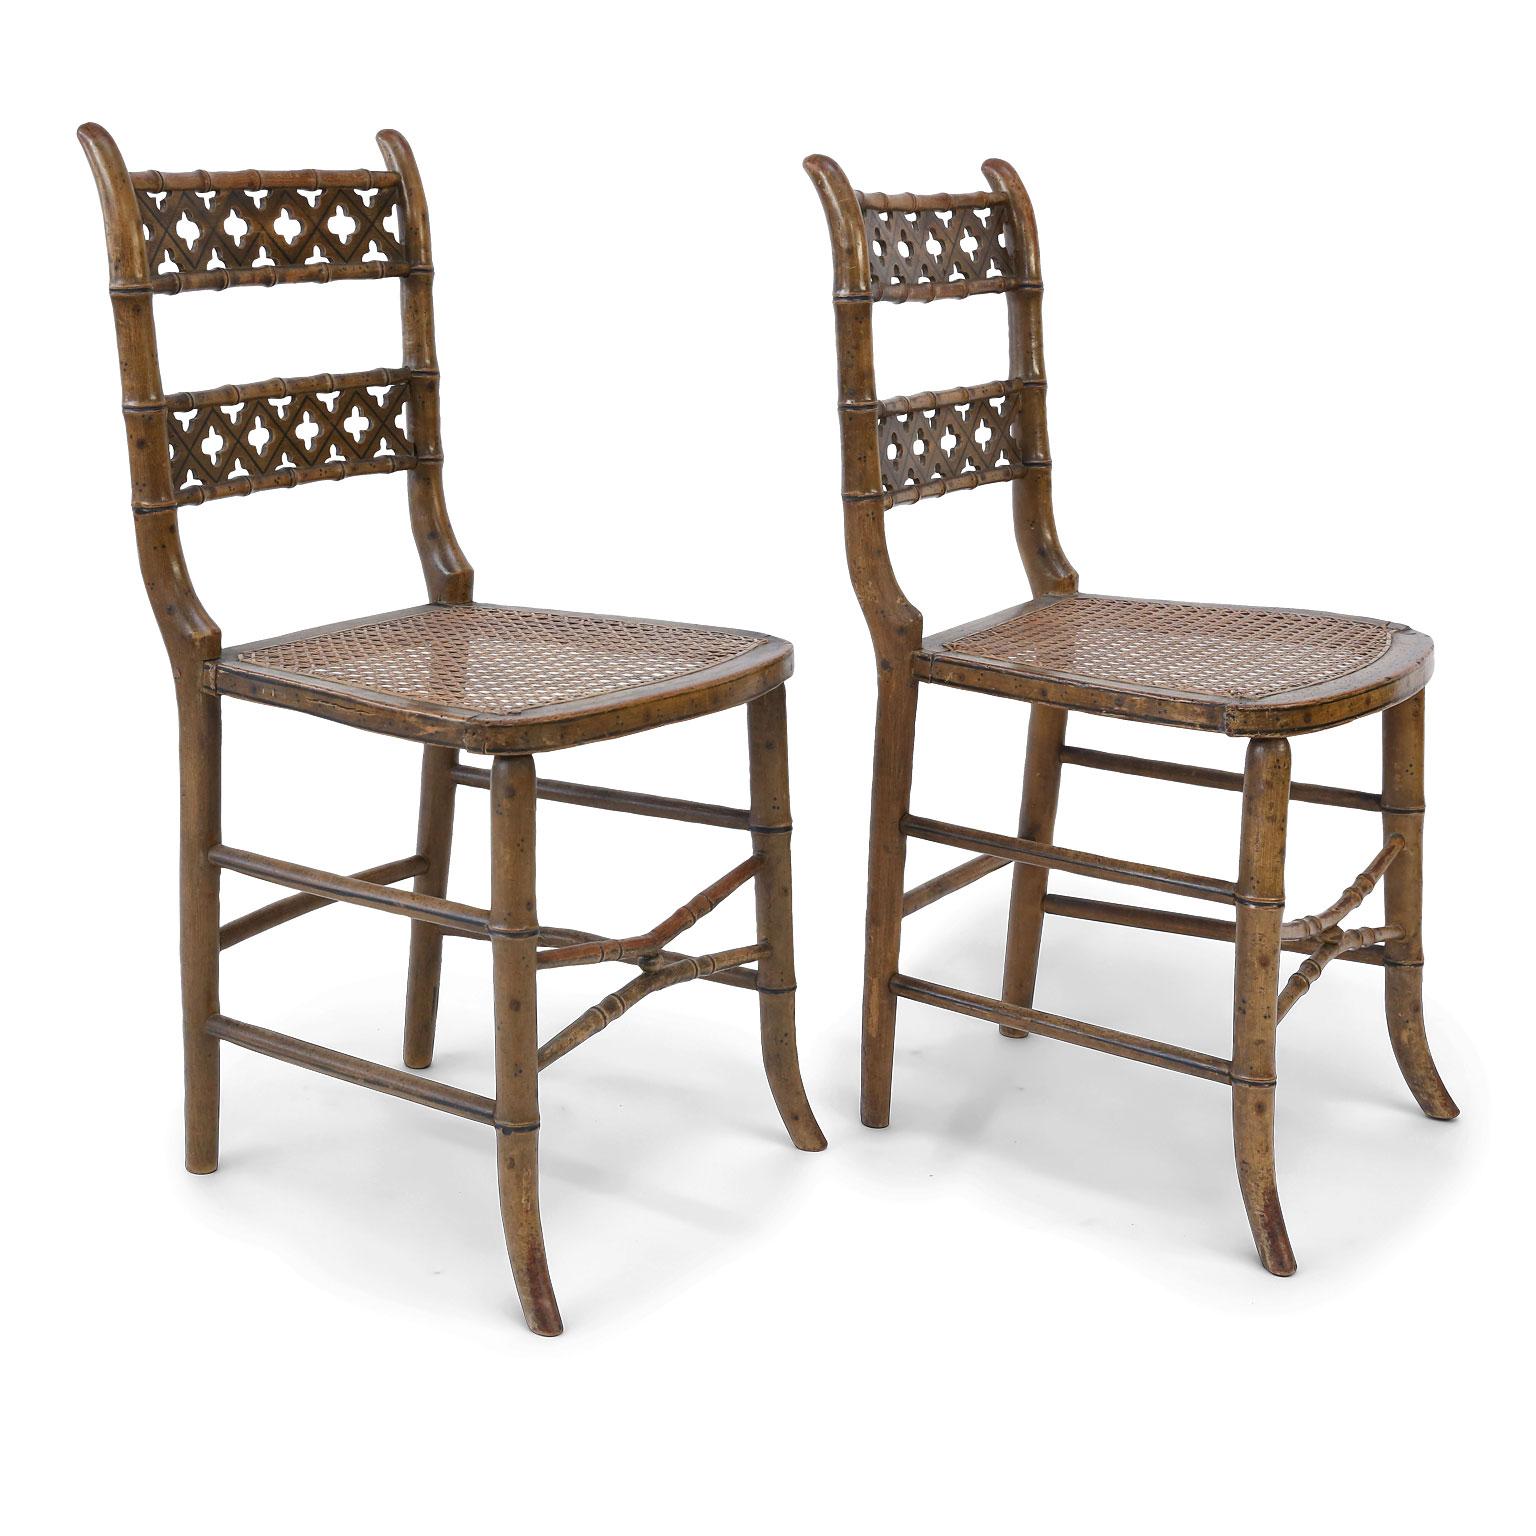 Pair of Regency Faux Bamboo Painted Chairs 1